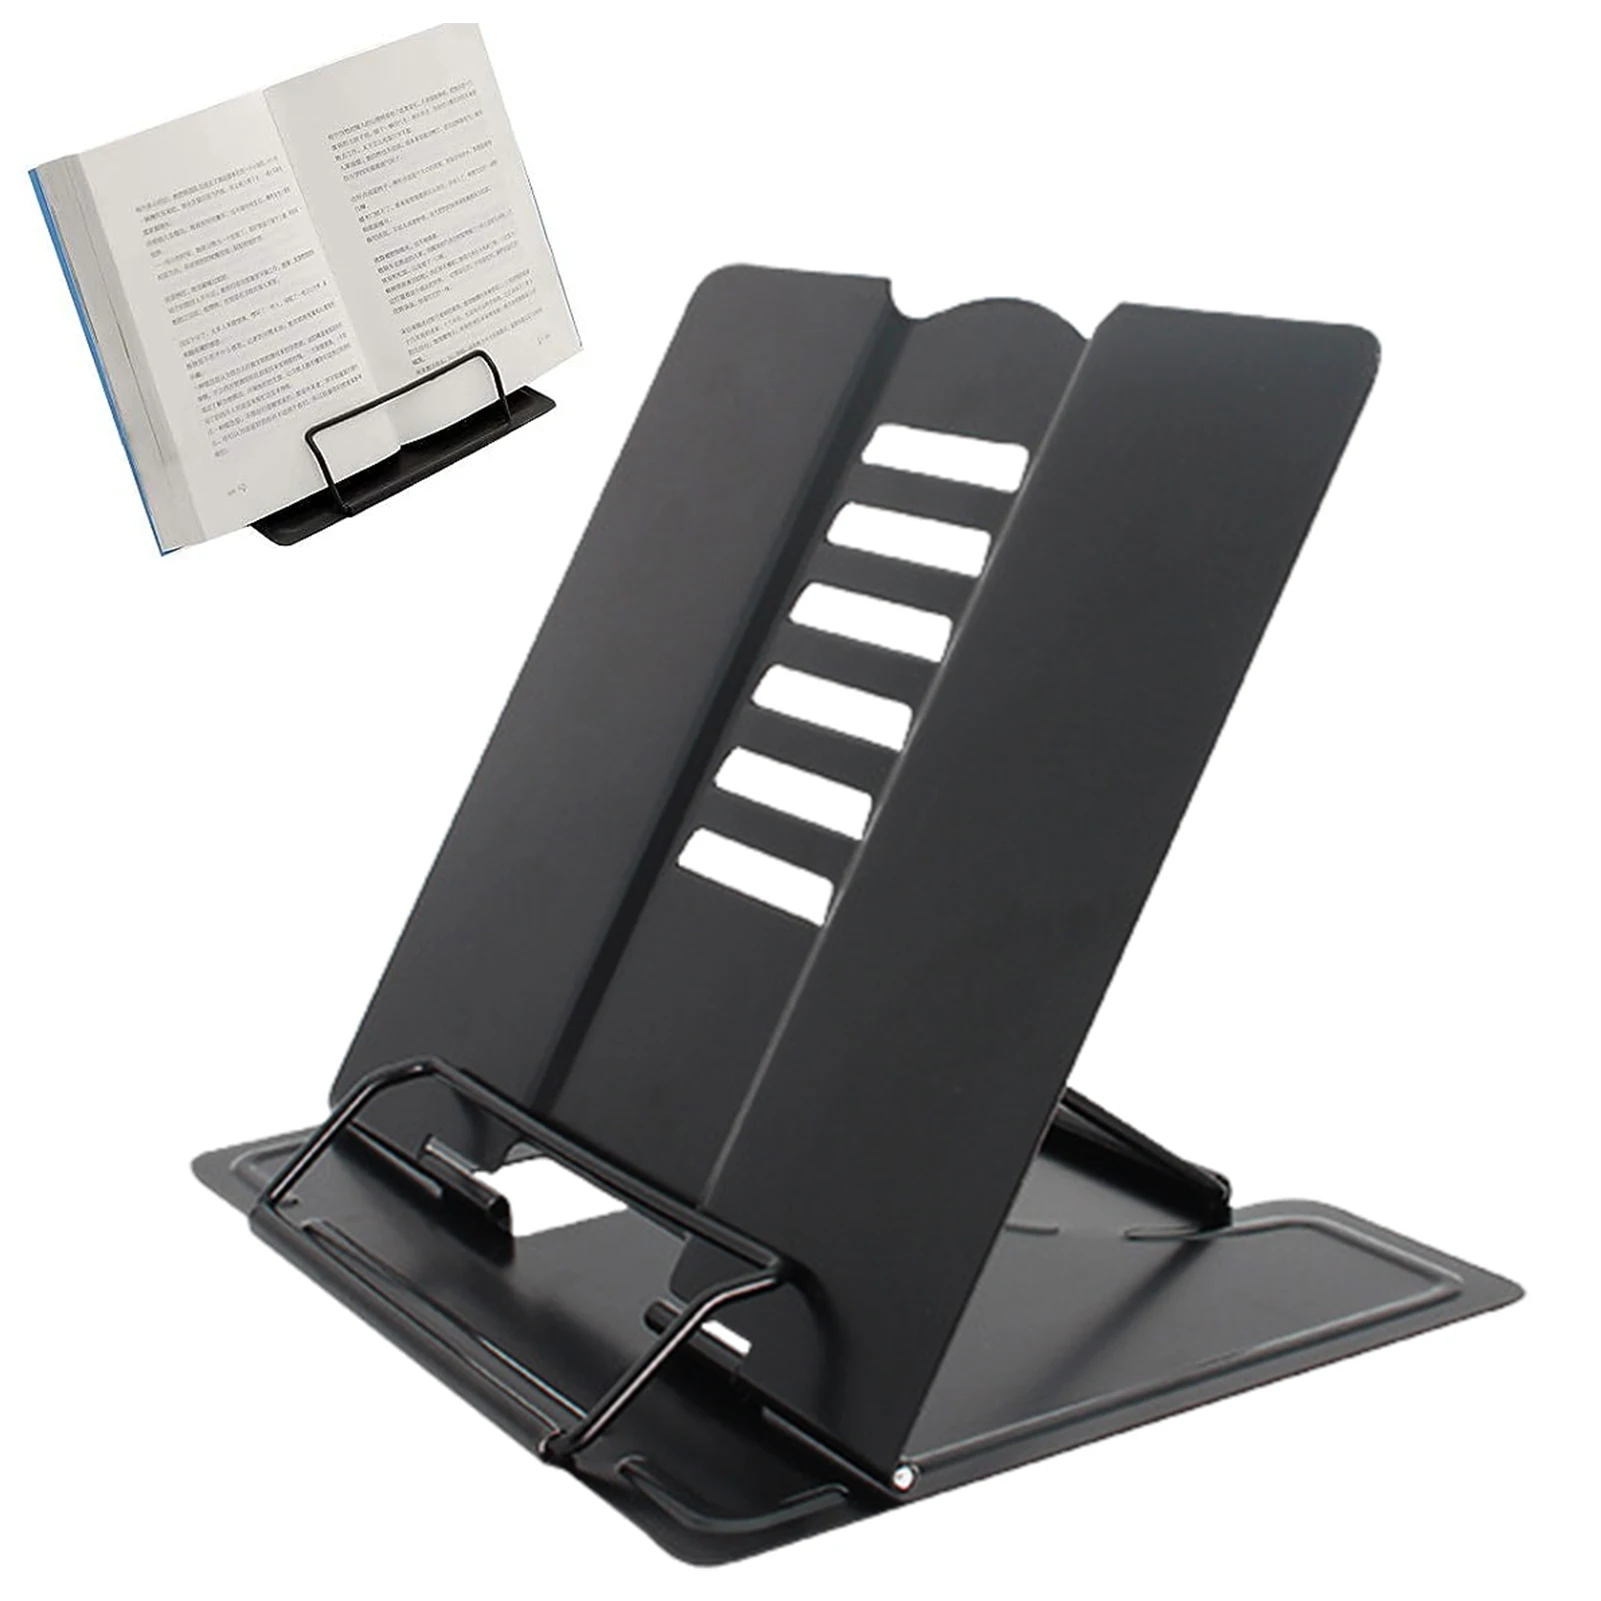 

Library Correct Sitting Posture Home Adjustable Angle Multifunctional Sheet Music Magazine Book Stand Portable For Reading Menu